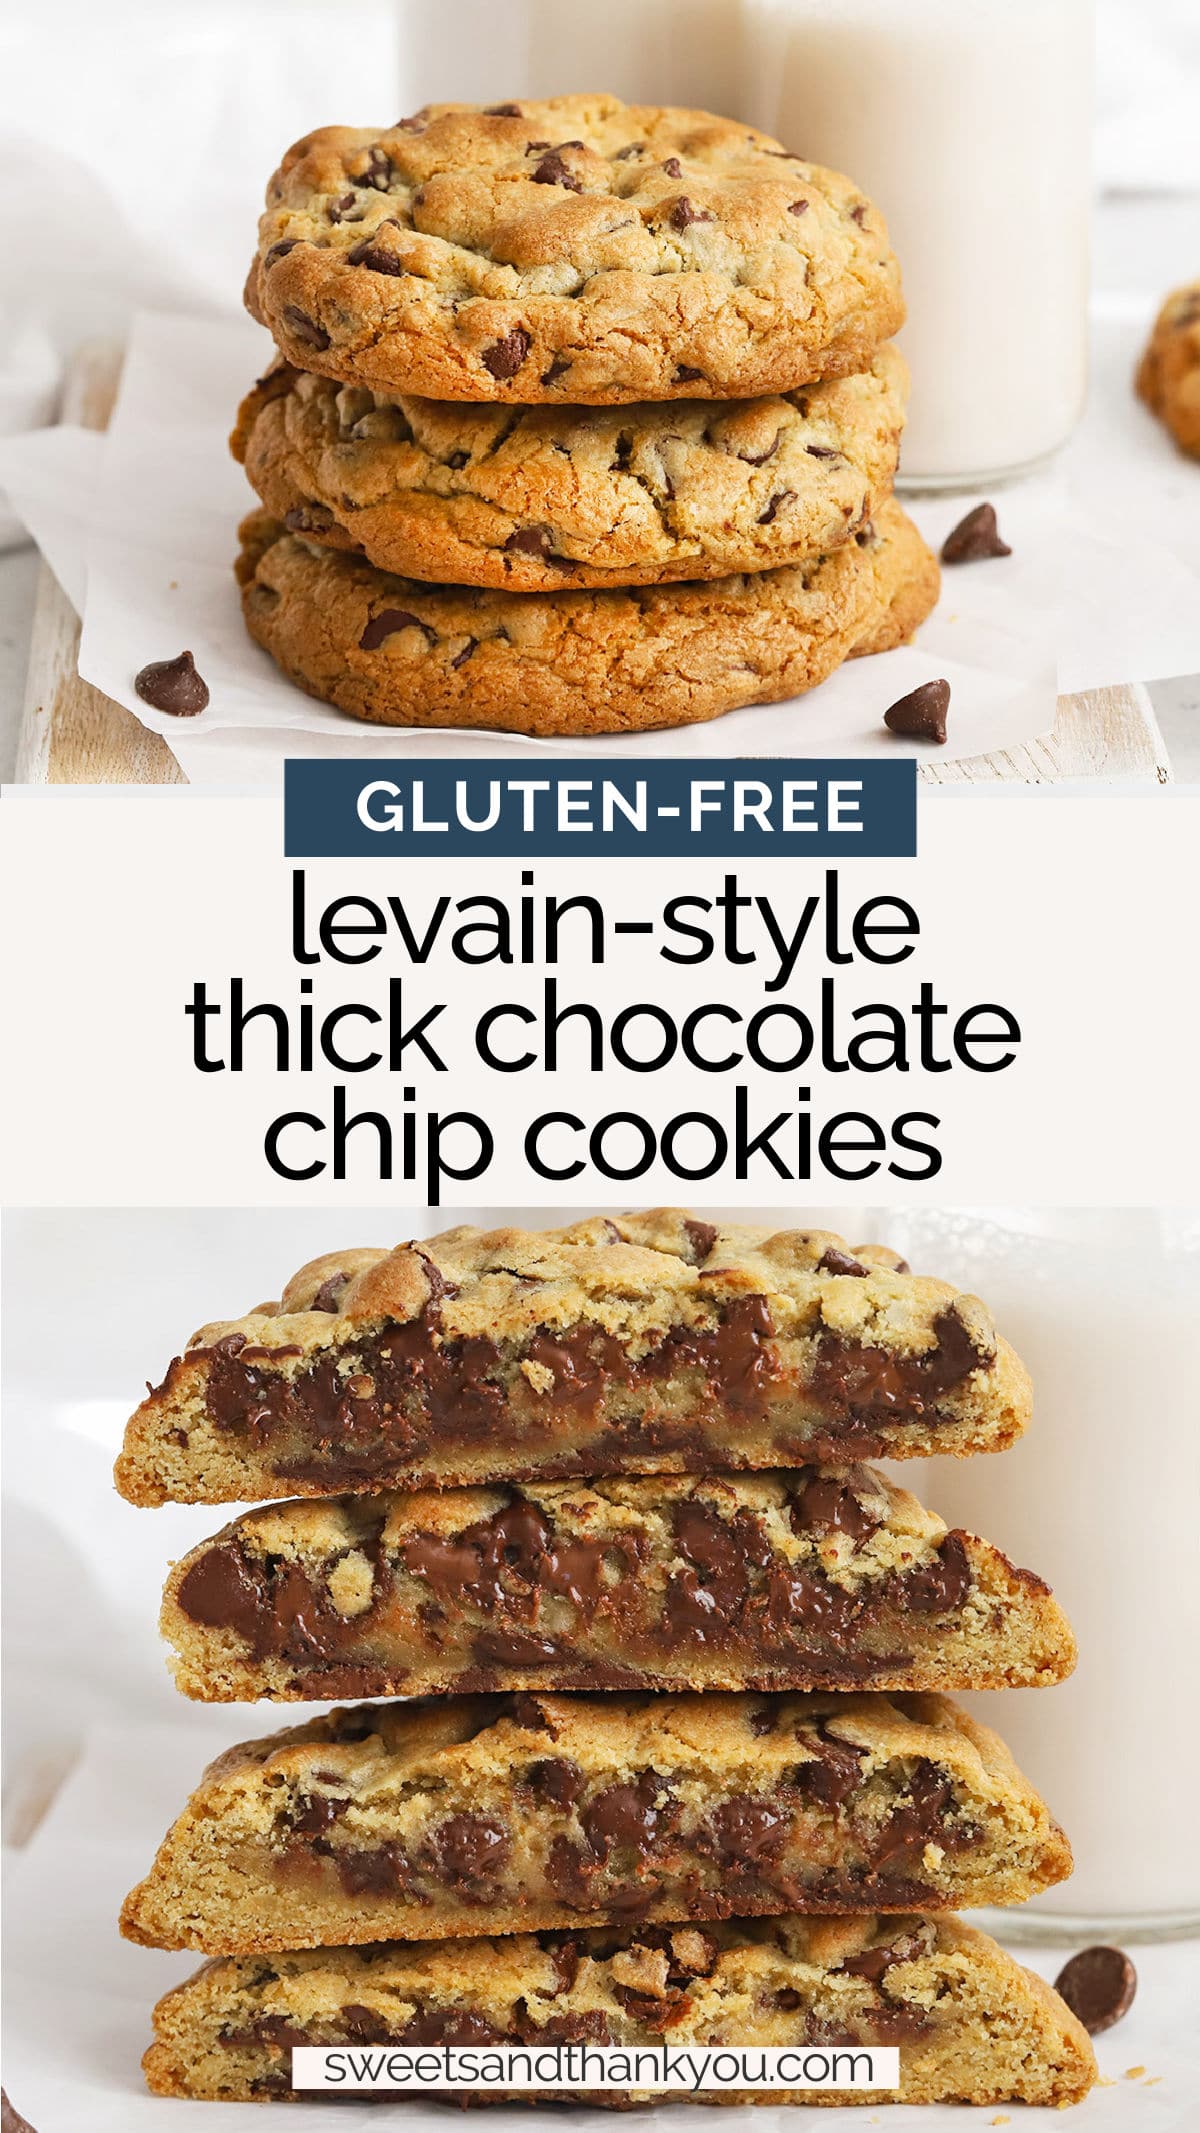 Gluten-Free Levain Chocolate Chip Cookies - Learn how to make Levain Bakery style thick gluten-free chocolate chip cookies at home! // thick gluten-free chocolate chip cookies // Levain copycat chocolate chip cookies // gluten-free levain two-chip chocolate chip cookies // the best gluten-free chocolate chip cookies // thick gluten-free cookies recipe // Sweets and Thank You Levain Cookies // Sweets & Thank You Levain Chocolate Chip Cookies